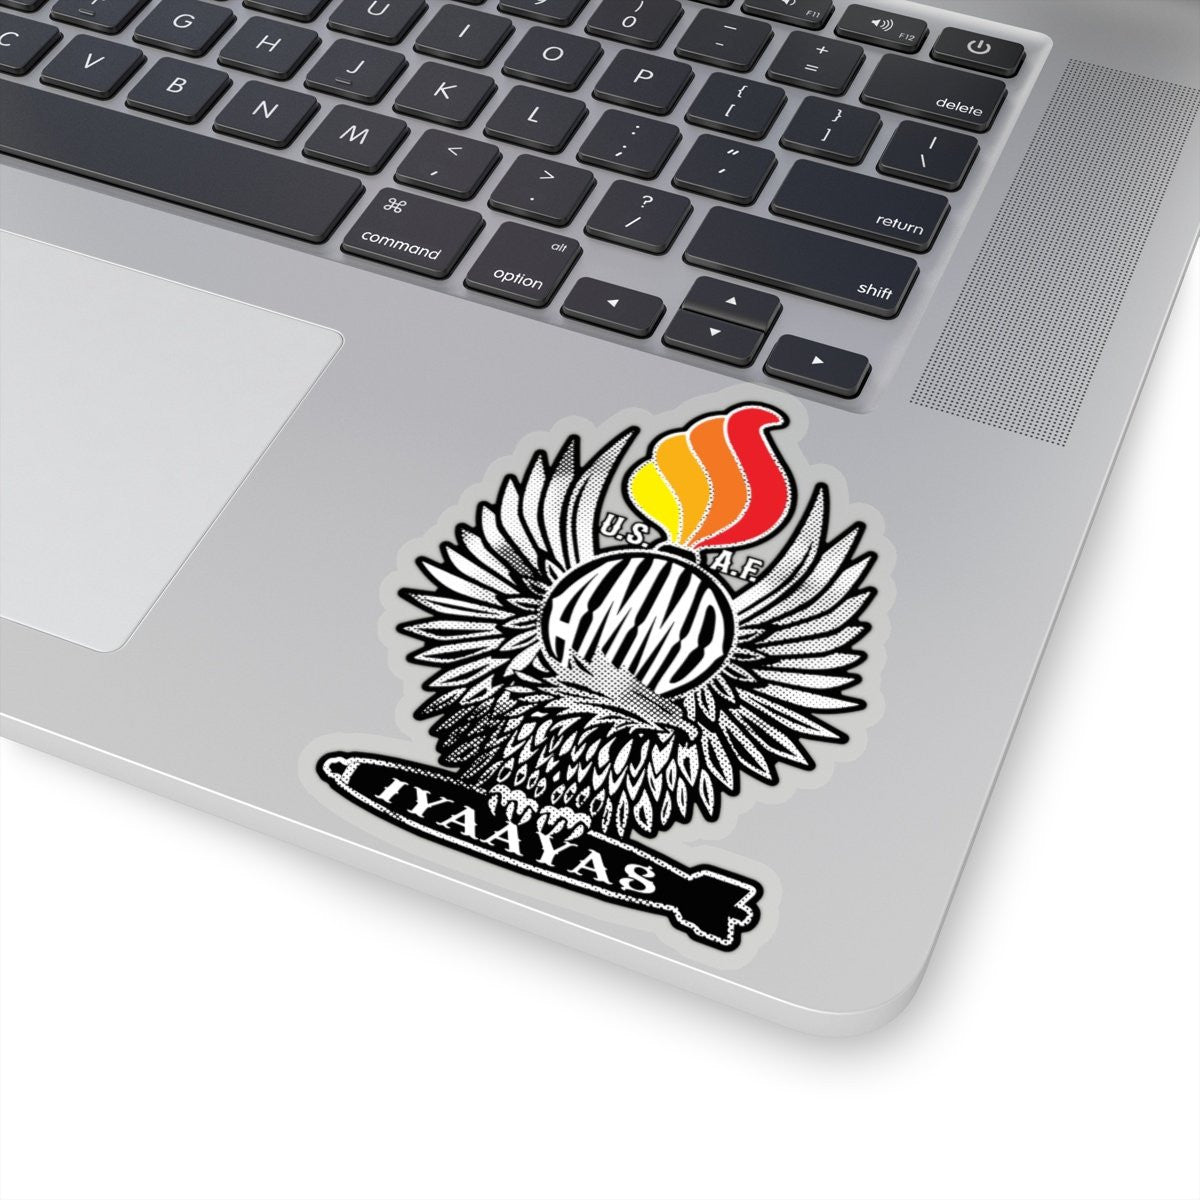 USAF AMMO IYAAYAS Eagle Claws MK-82 Pisspot Colored Flames Die Cut Indoor Stickers